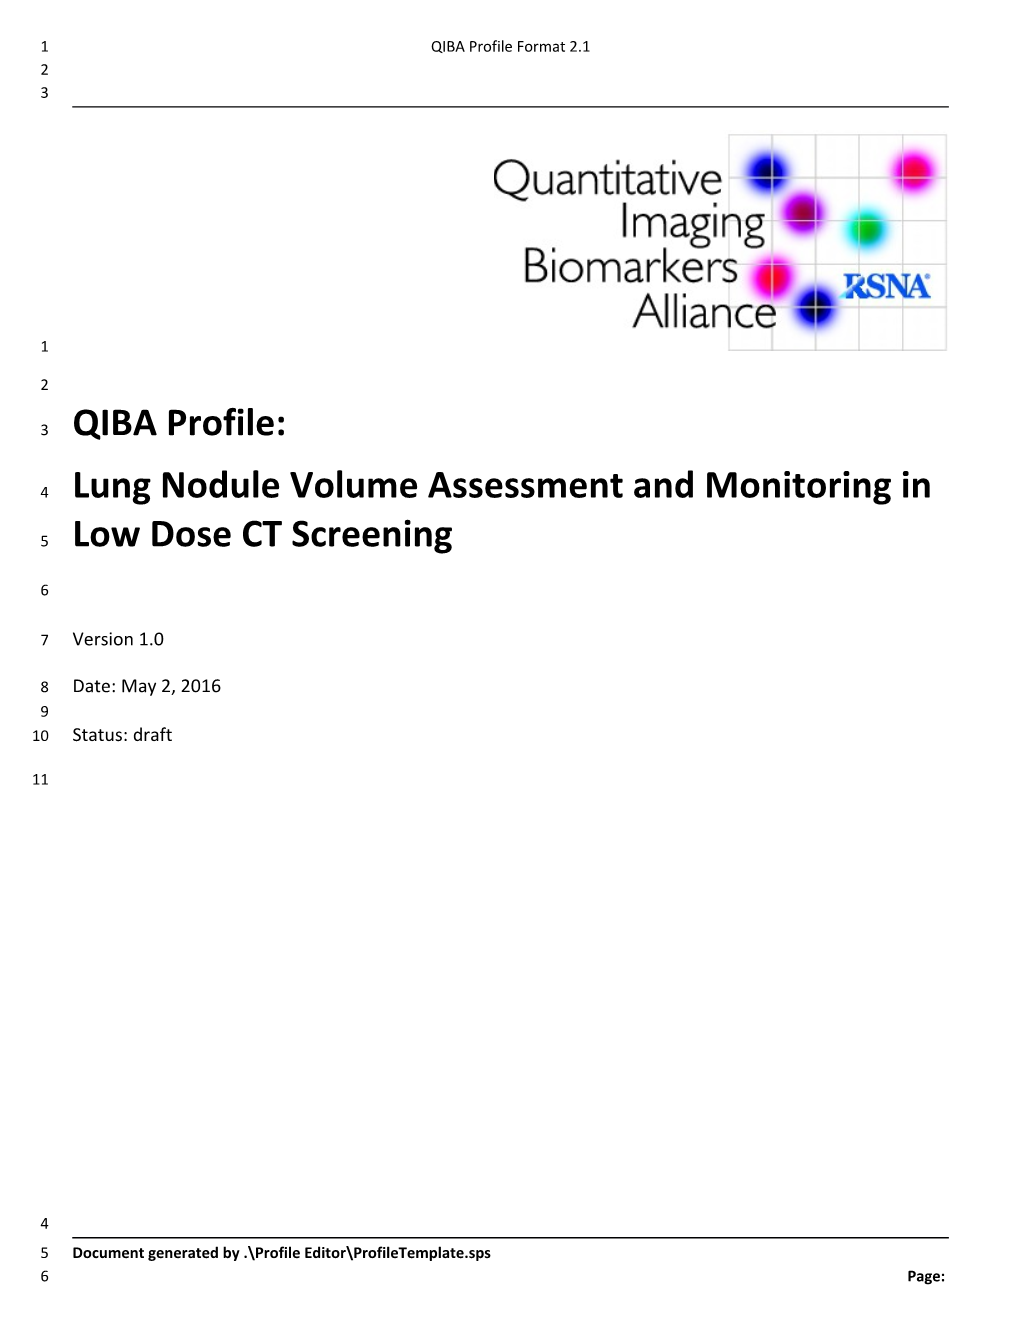 Lung Nodule Volume Assessment and Monitoring in Low Dose CT Screening